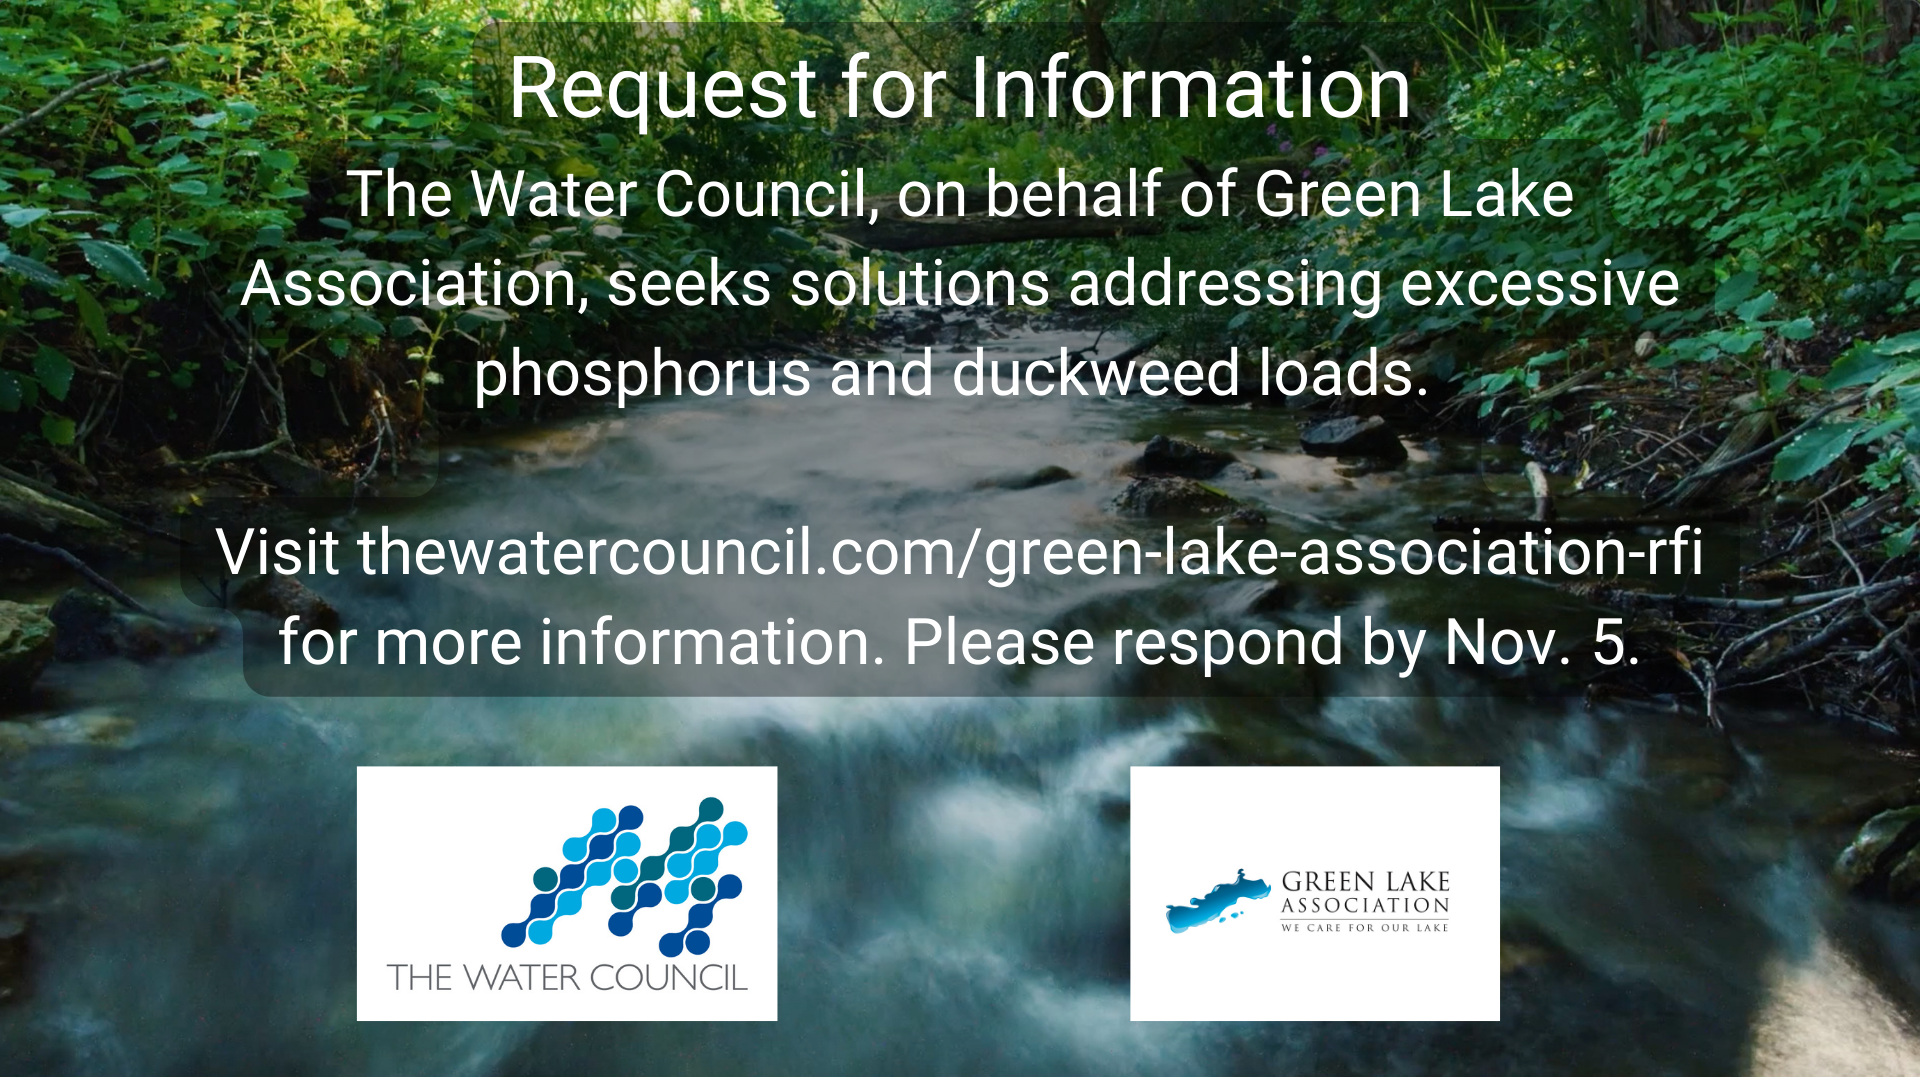 Do you have a technology, system or engineered solution to address phosphorus in a known point source for an inland lake? Please consider submit...